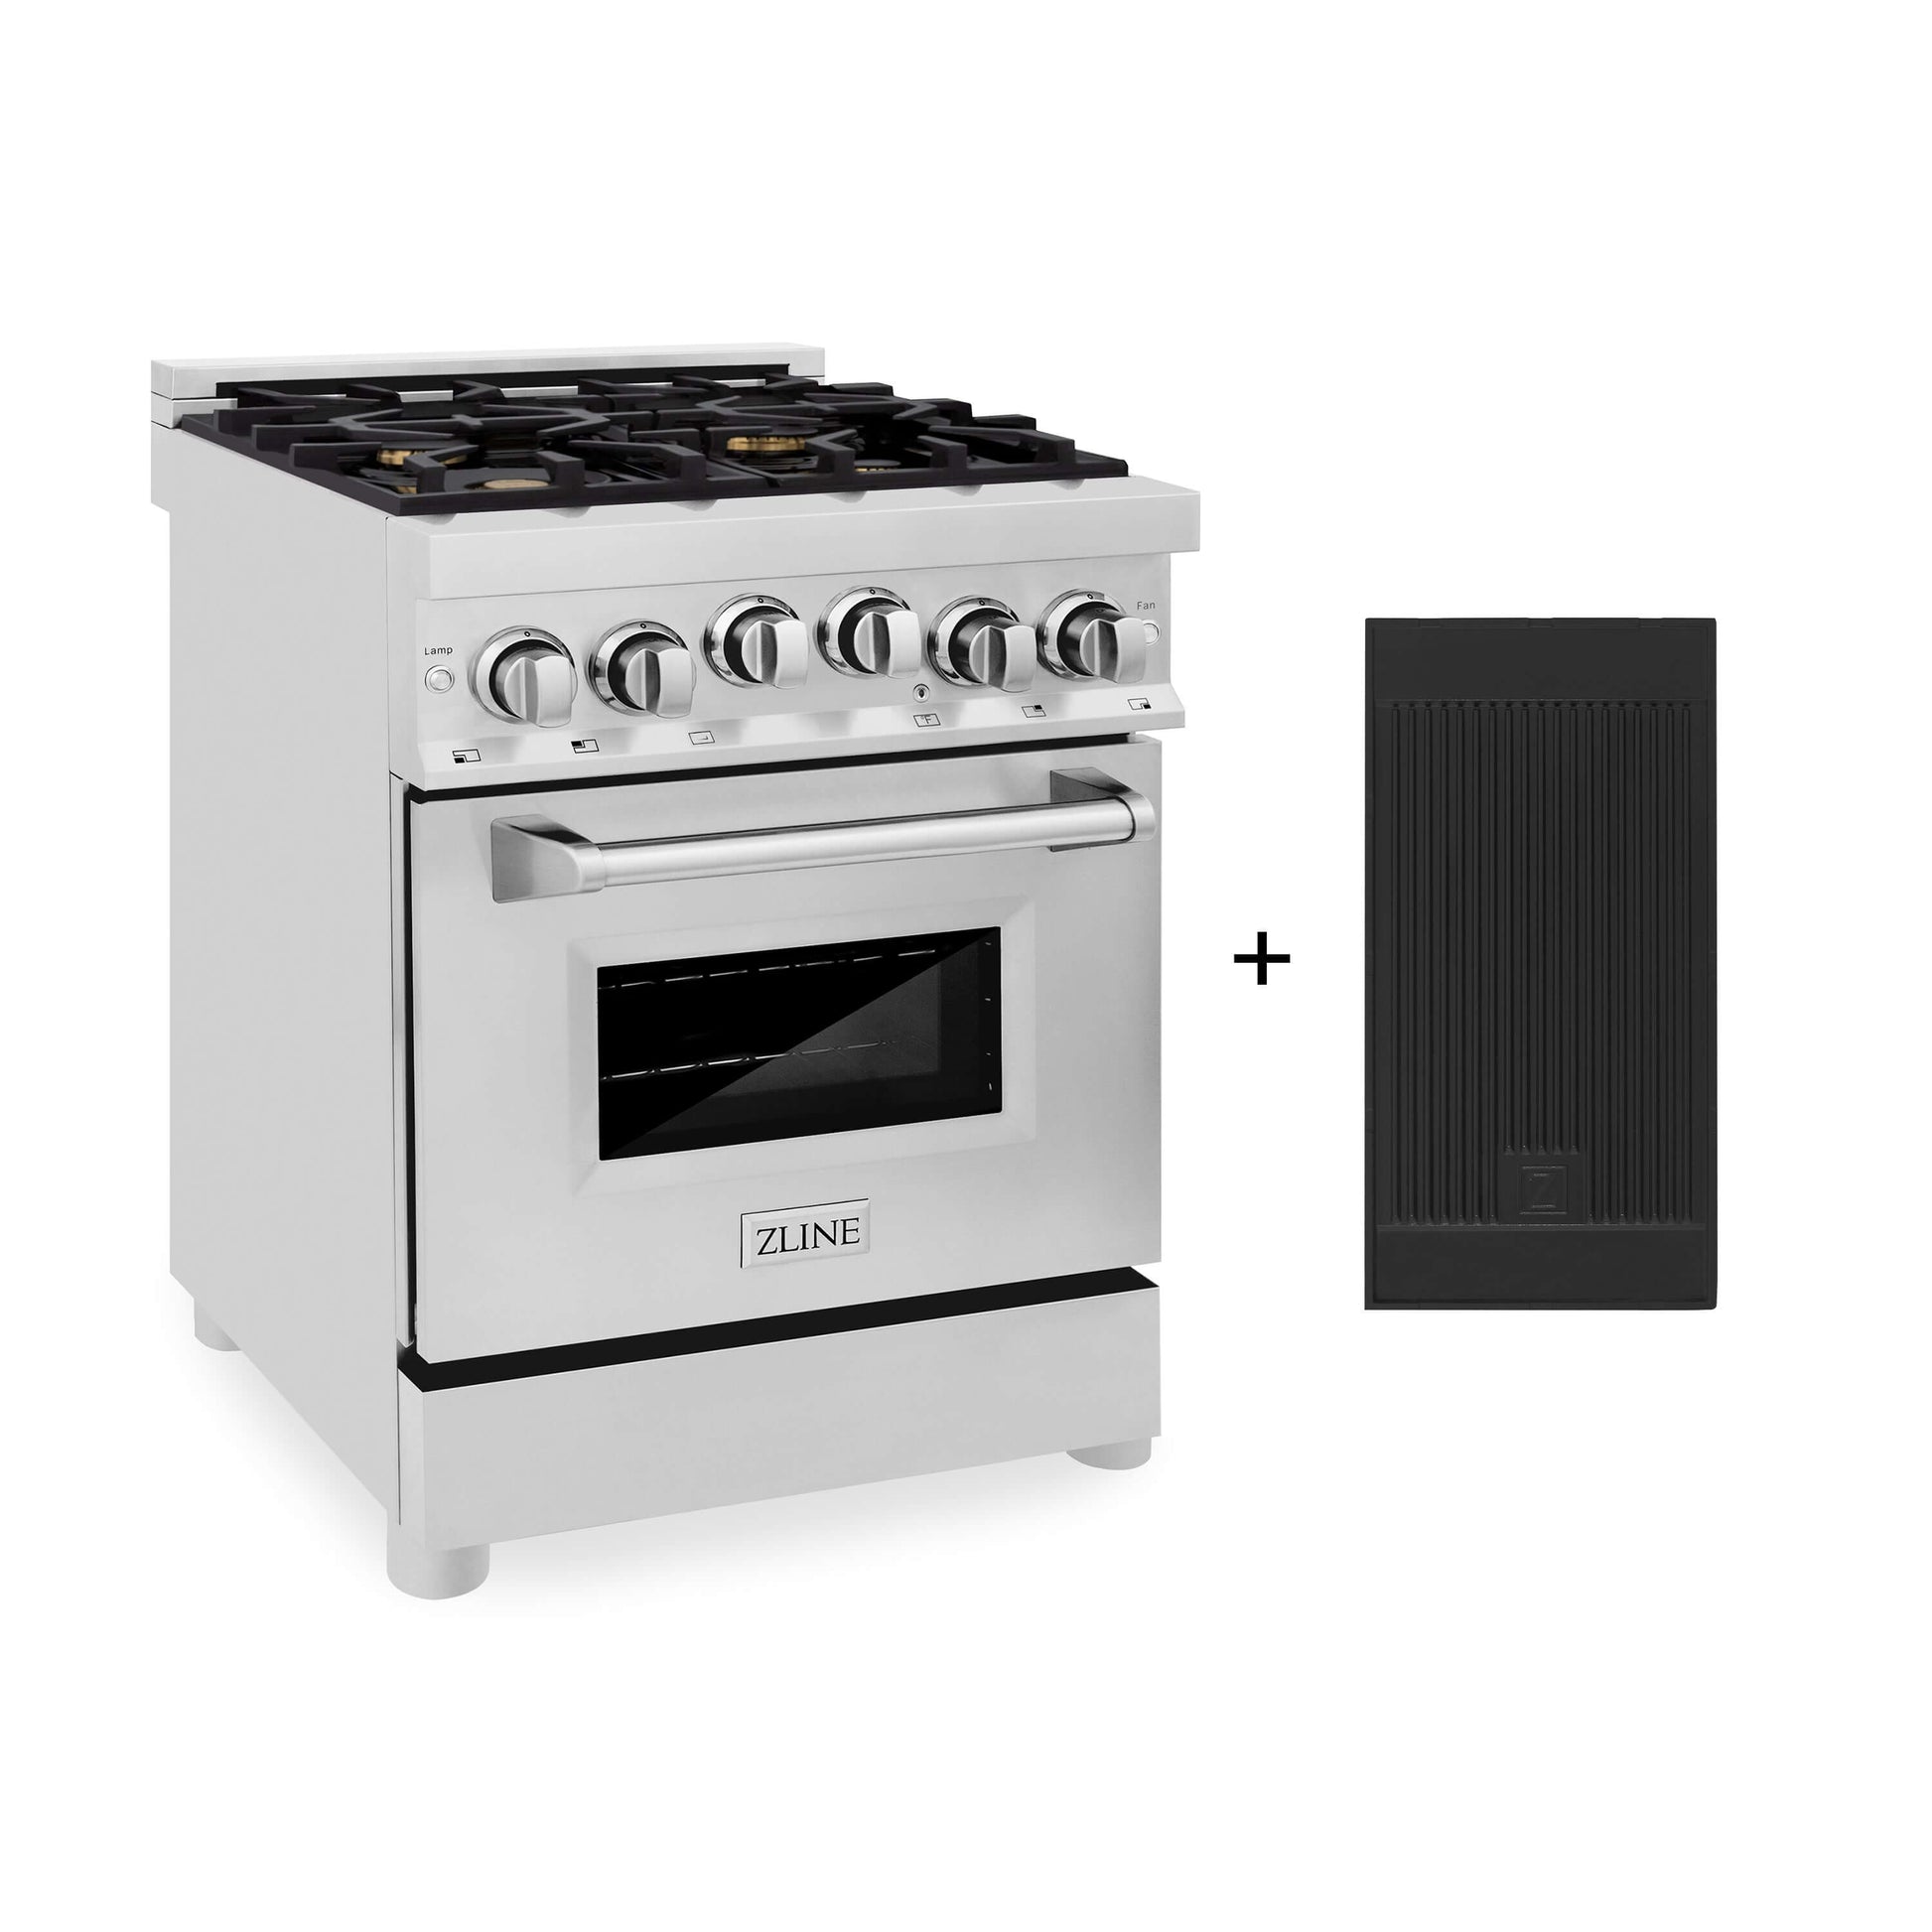 ZLINE 24" Gas Oven and Cooktop Range with Griddle - Stainless Steel with Brass Burners